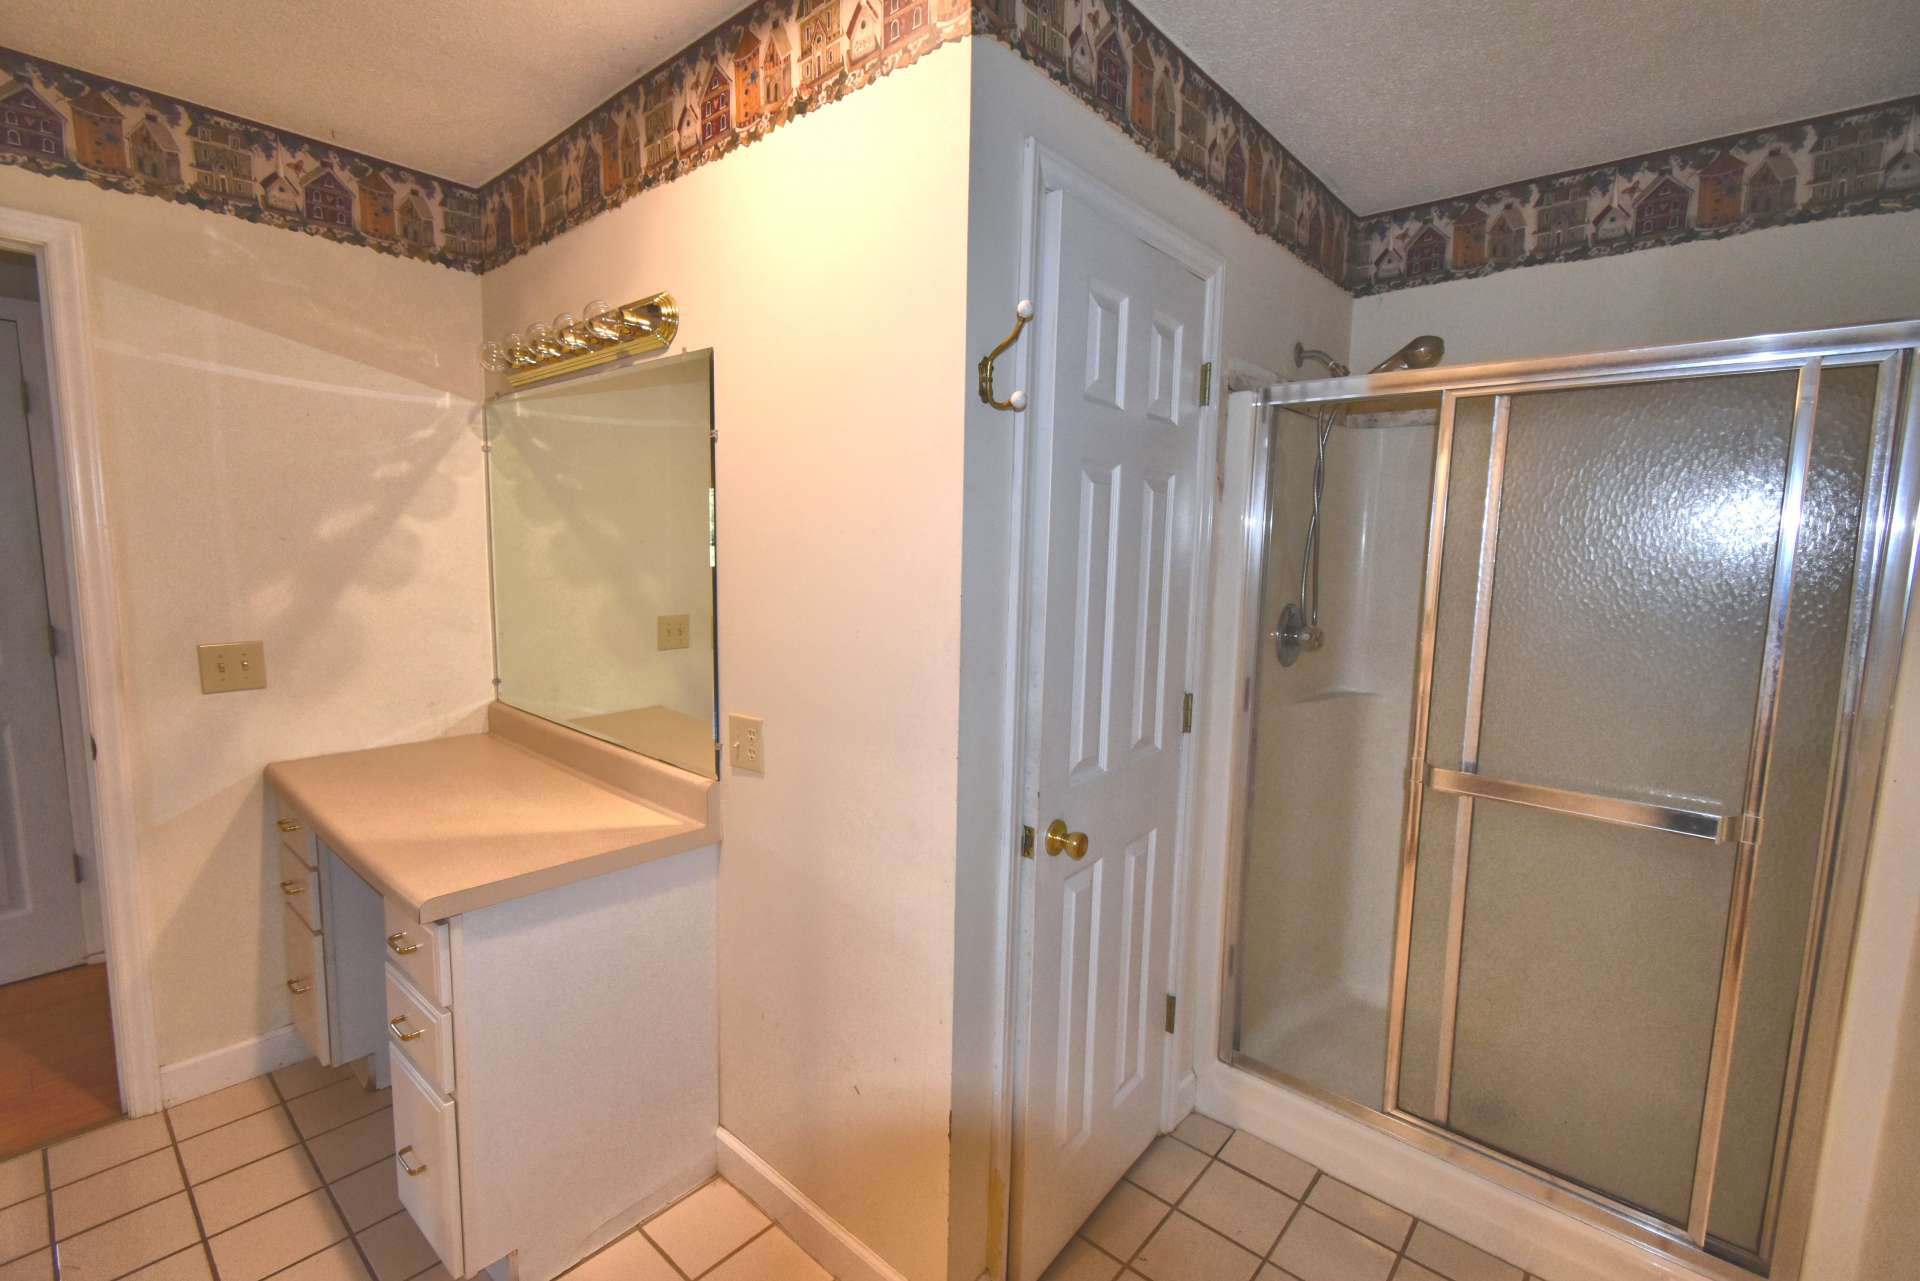 The main level bath features a walk-in shower and a make-up vanity.